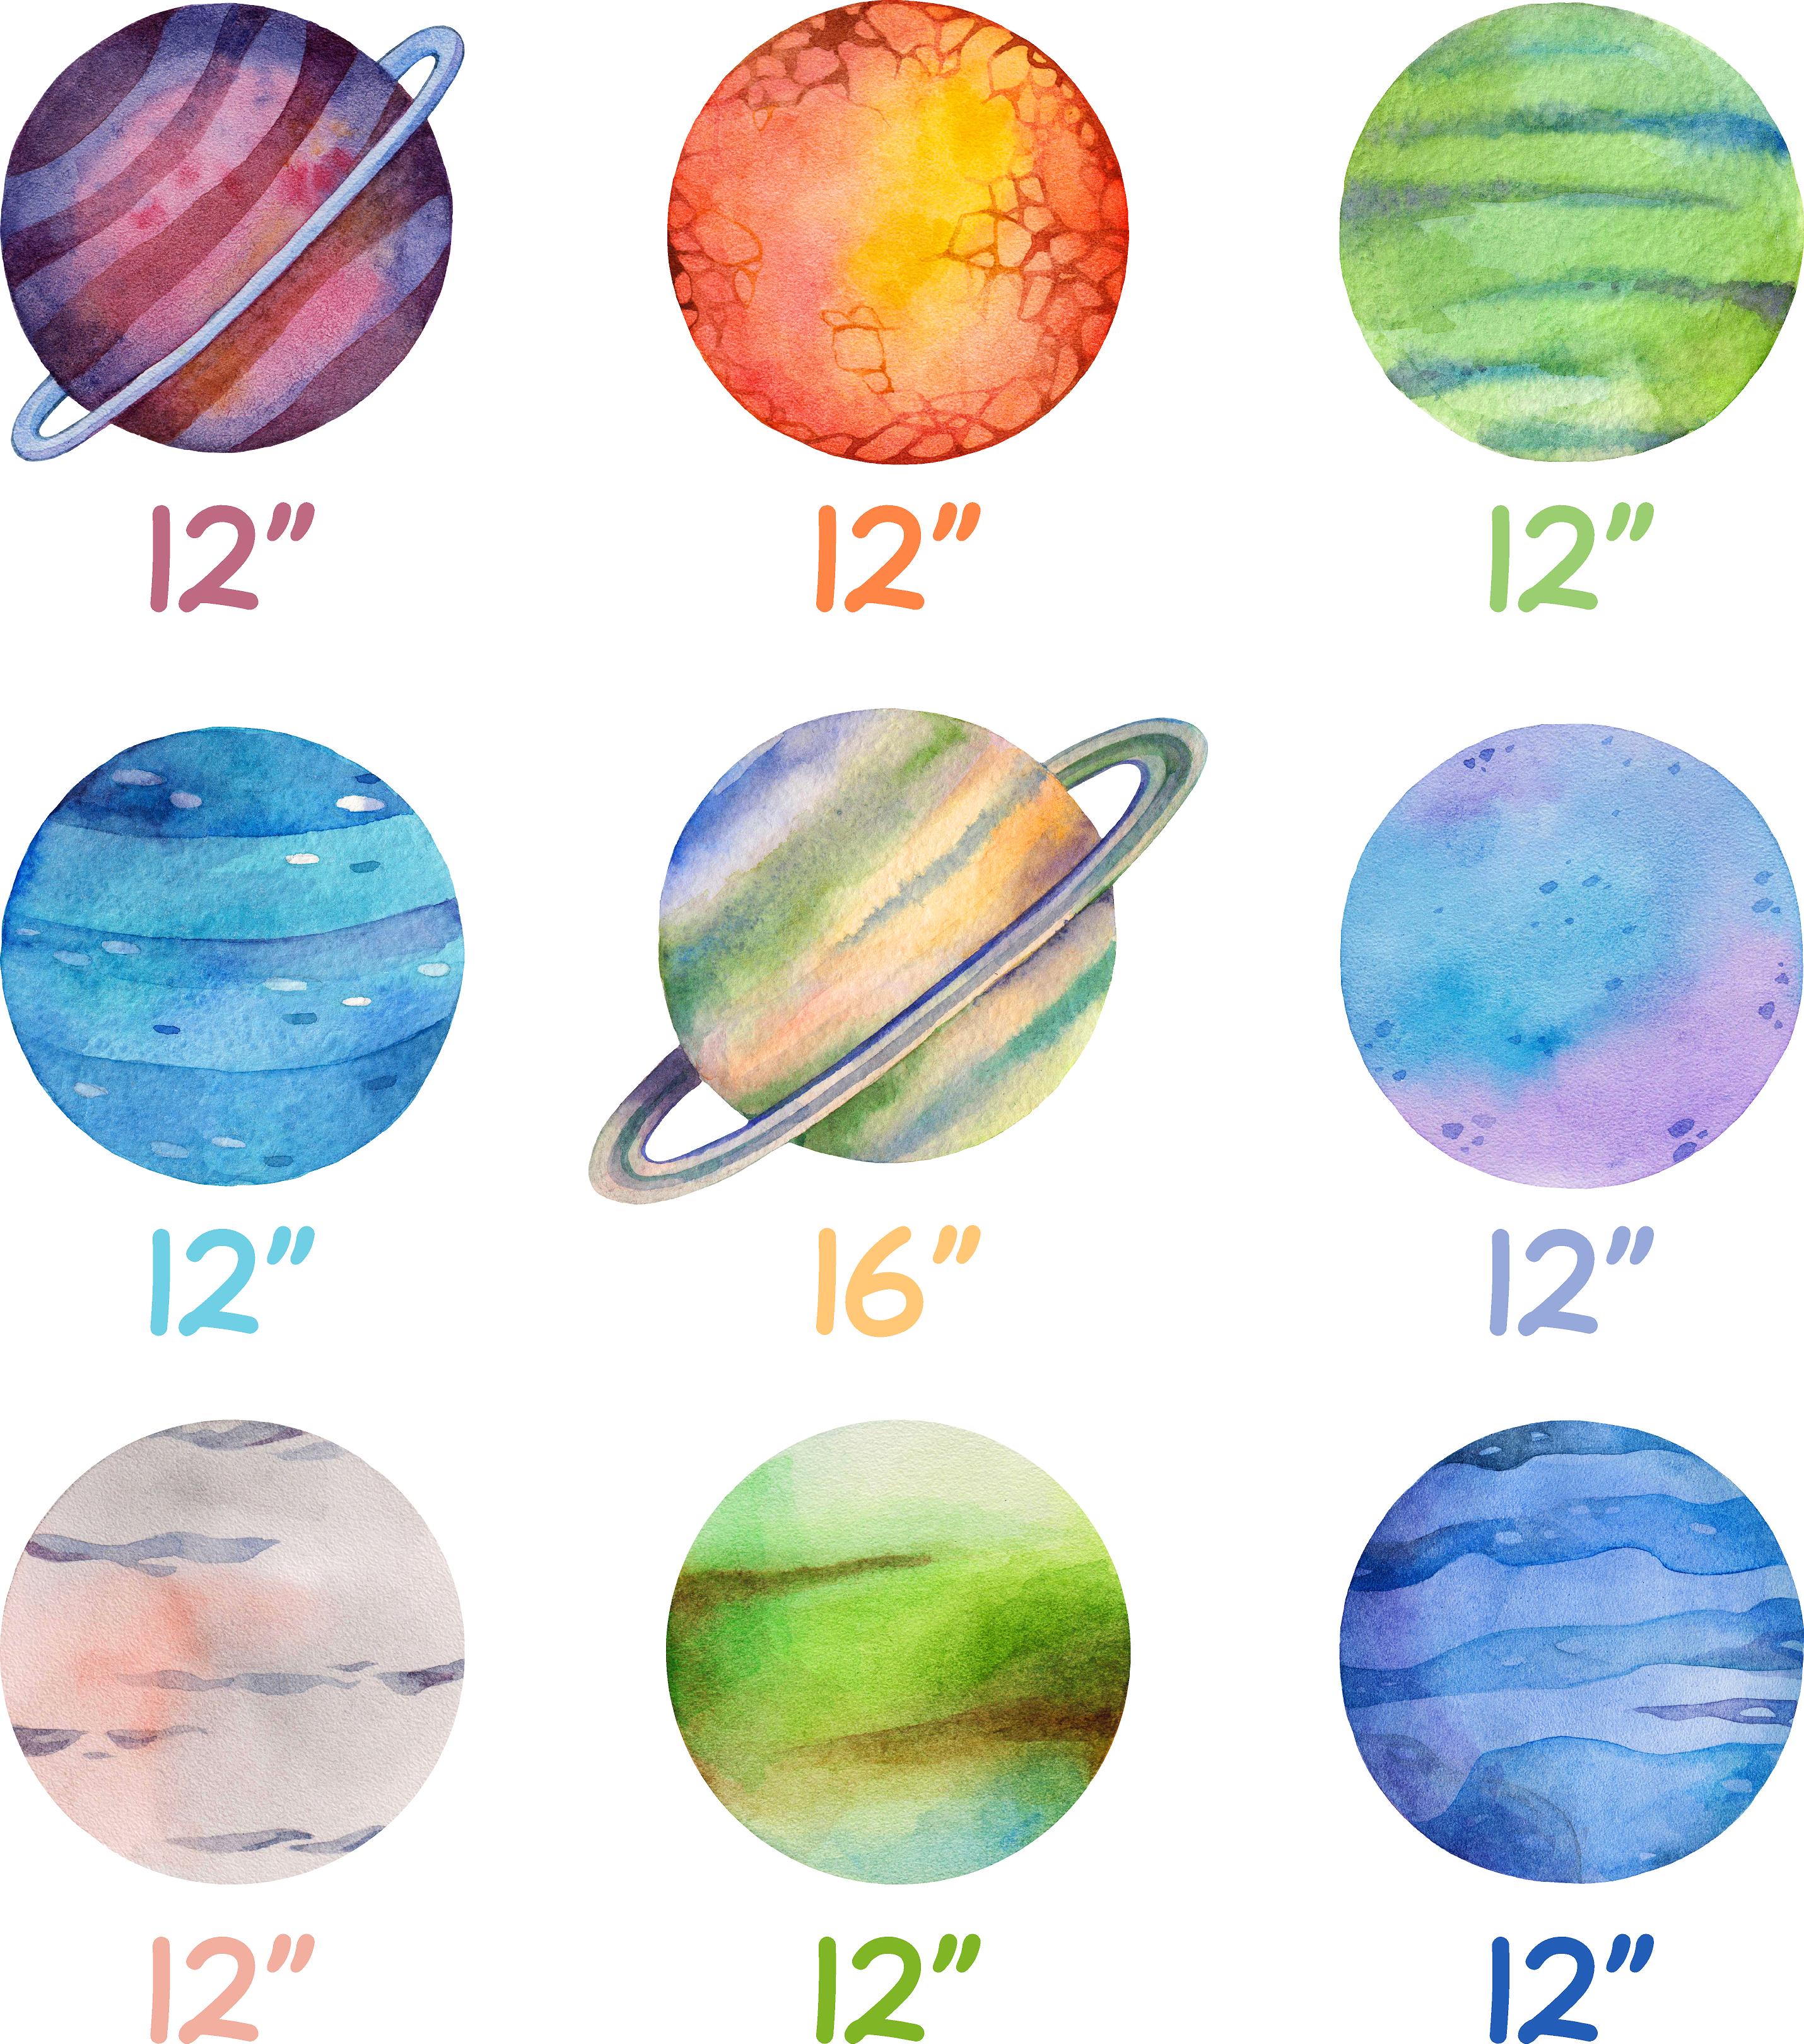 Colorful Planets Wall Decal Set of 9 Watercolor Solar System Wall Stickers Space Theme | DecalBaby